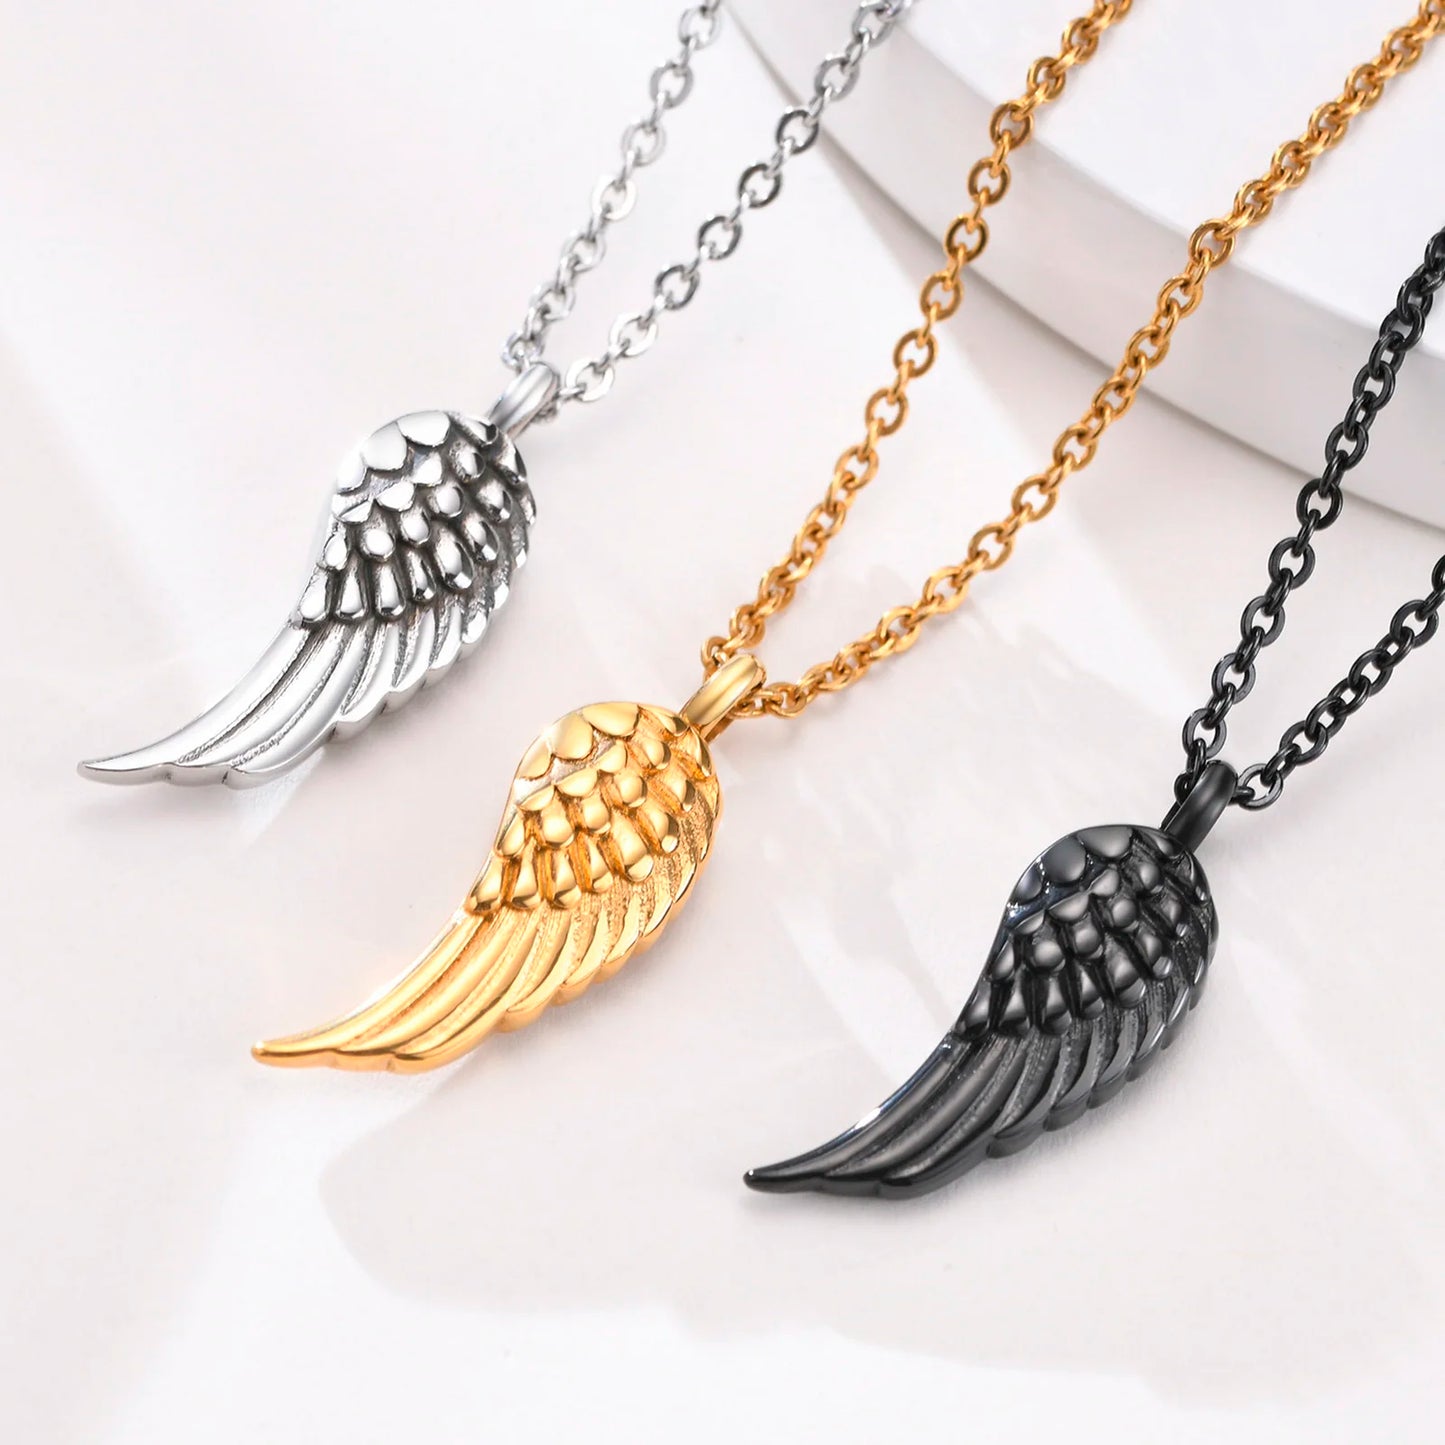 Delicate Angel Wing Cremation Jewelry Necklace Keepsake Urn For Ashes